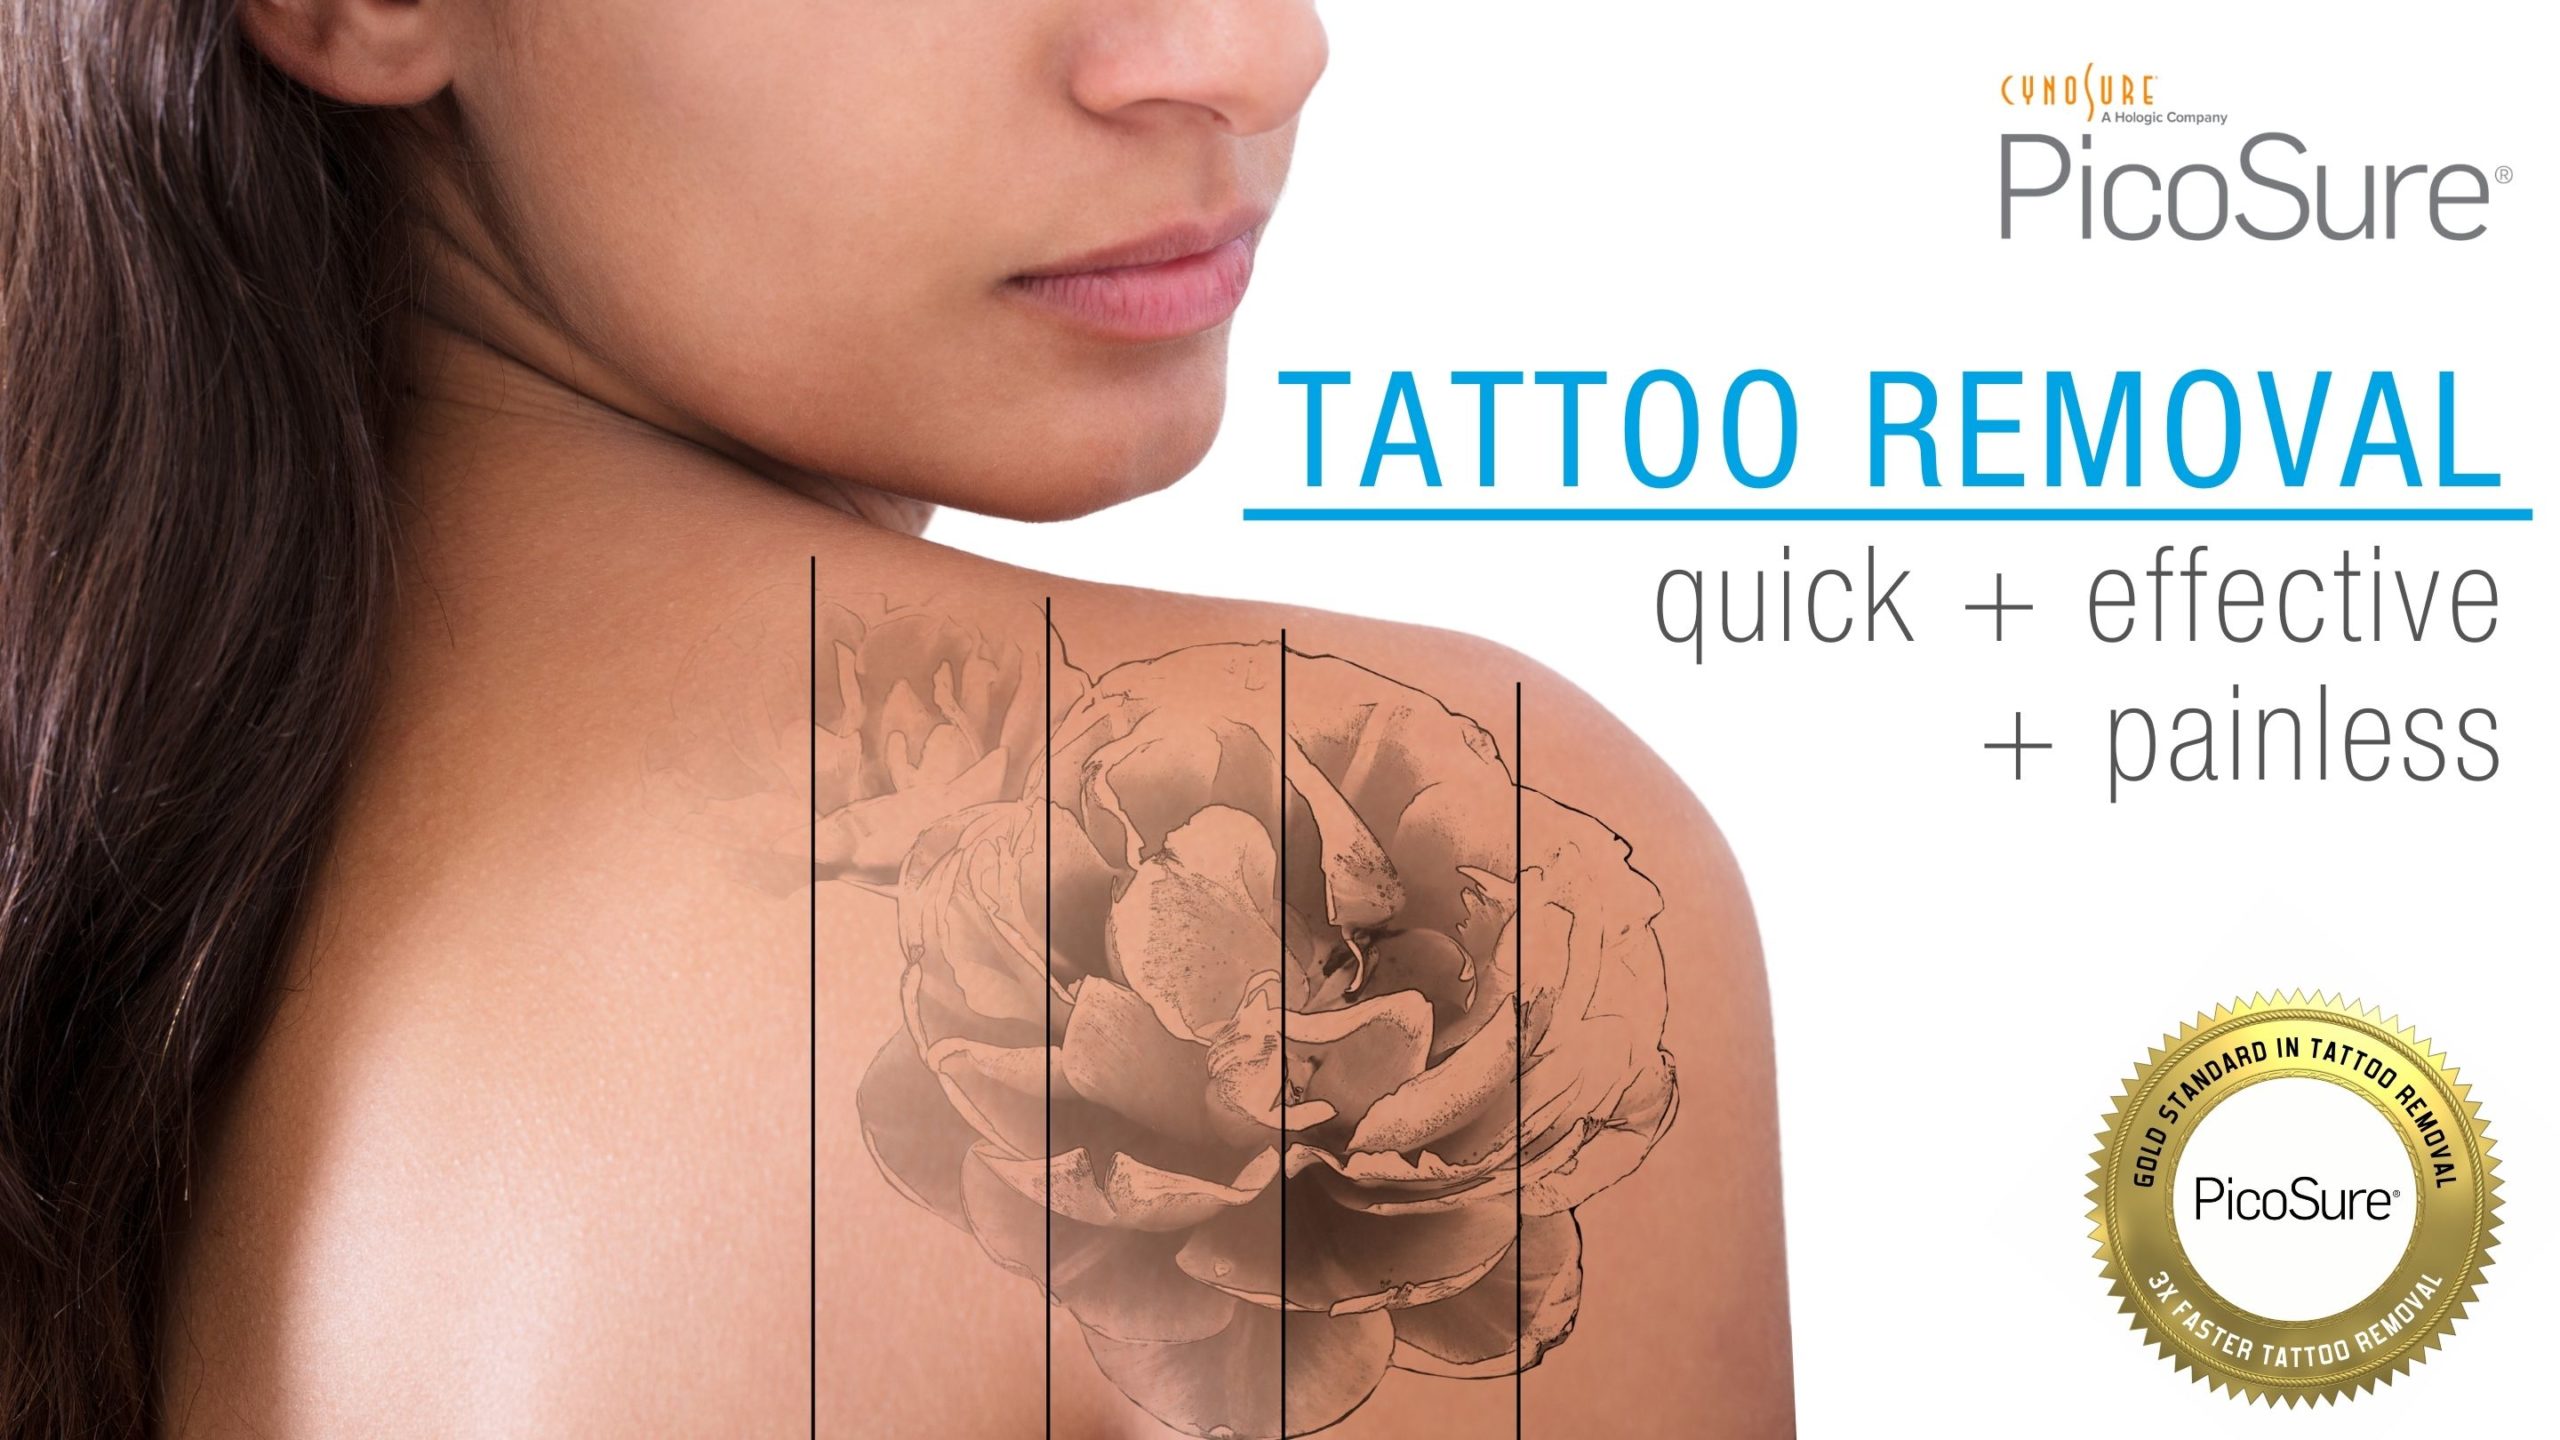 laser tattoo removal treatment on woman's back